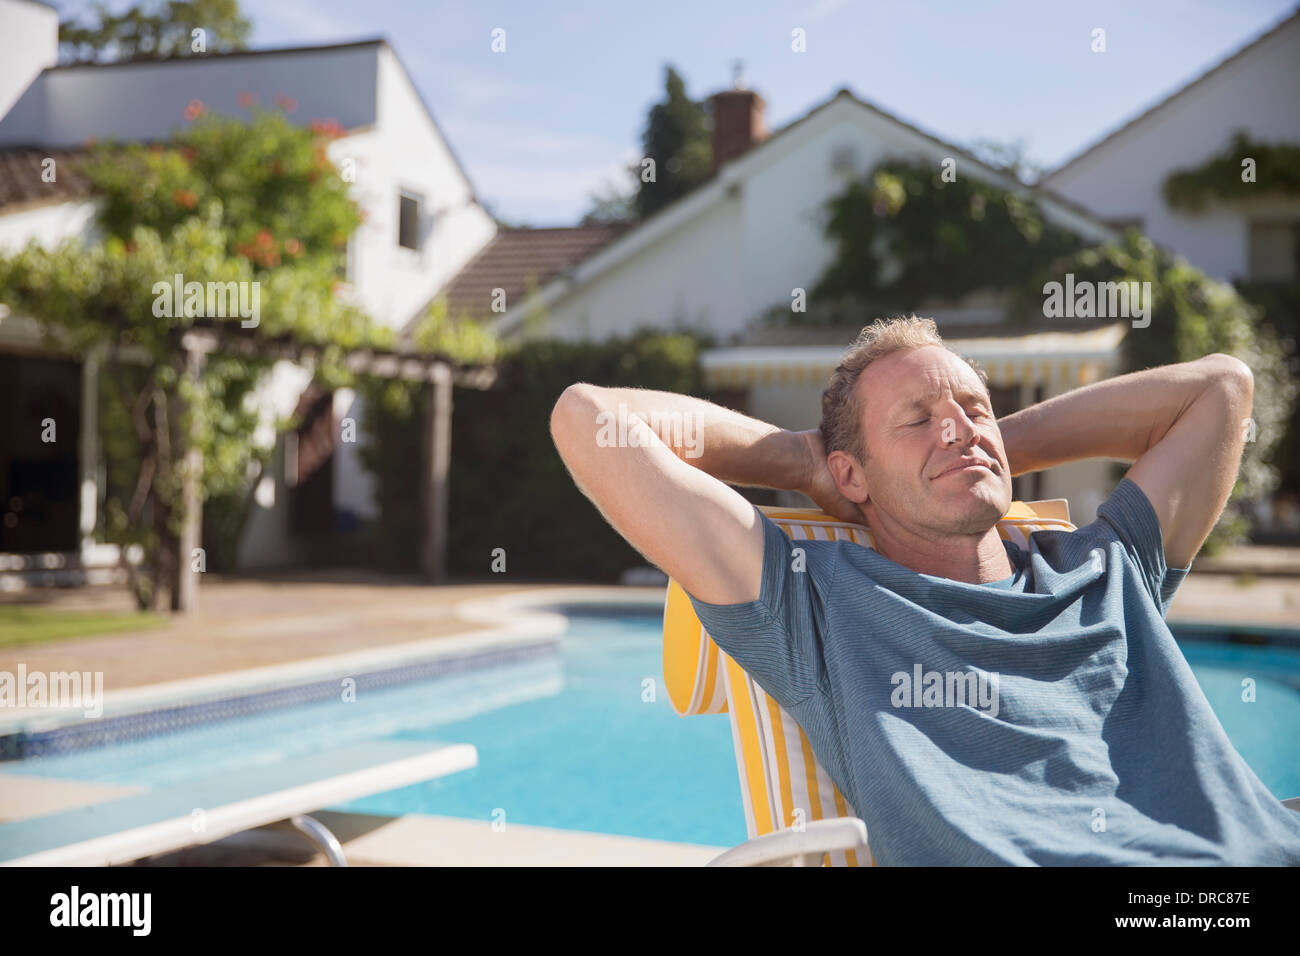 Man relaxing at poolside Banque D'Images